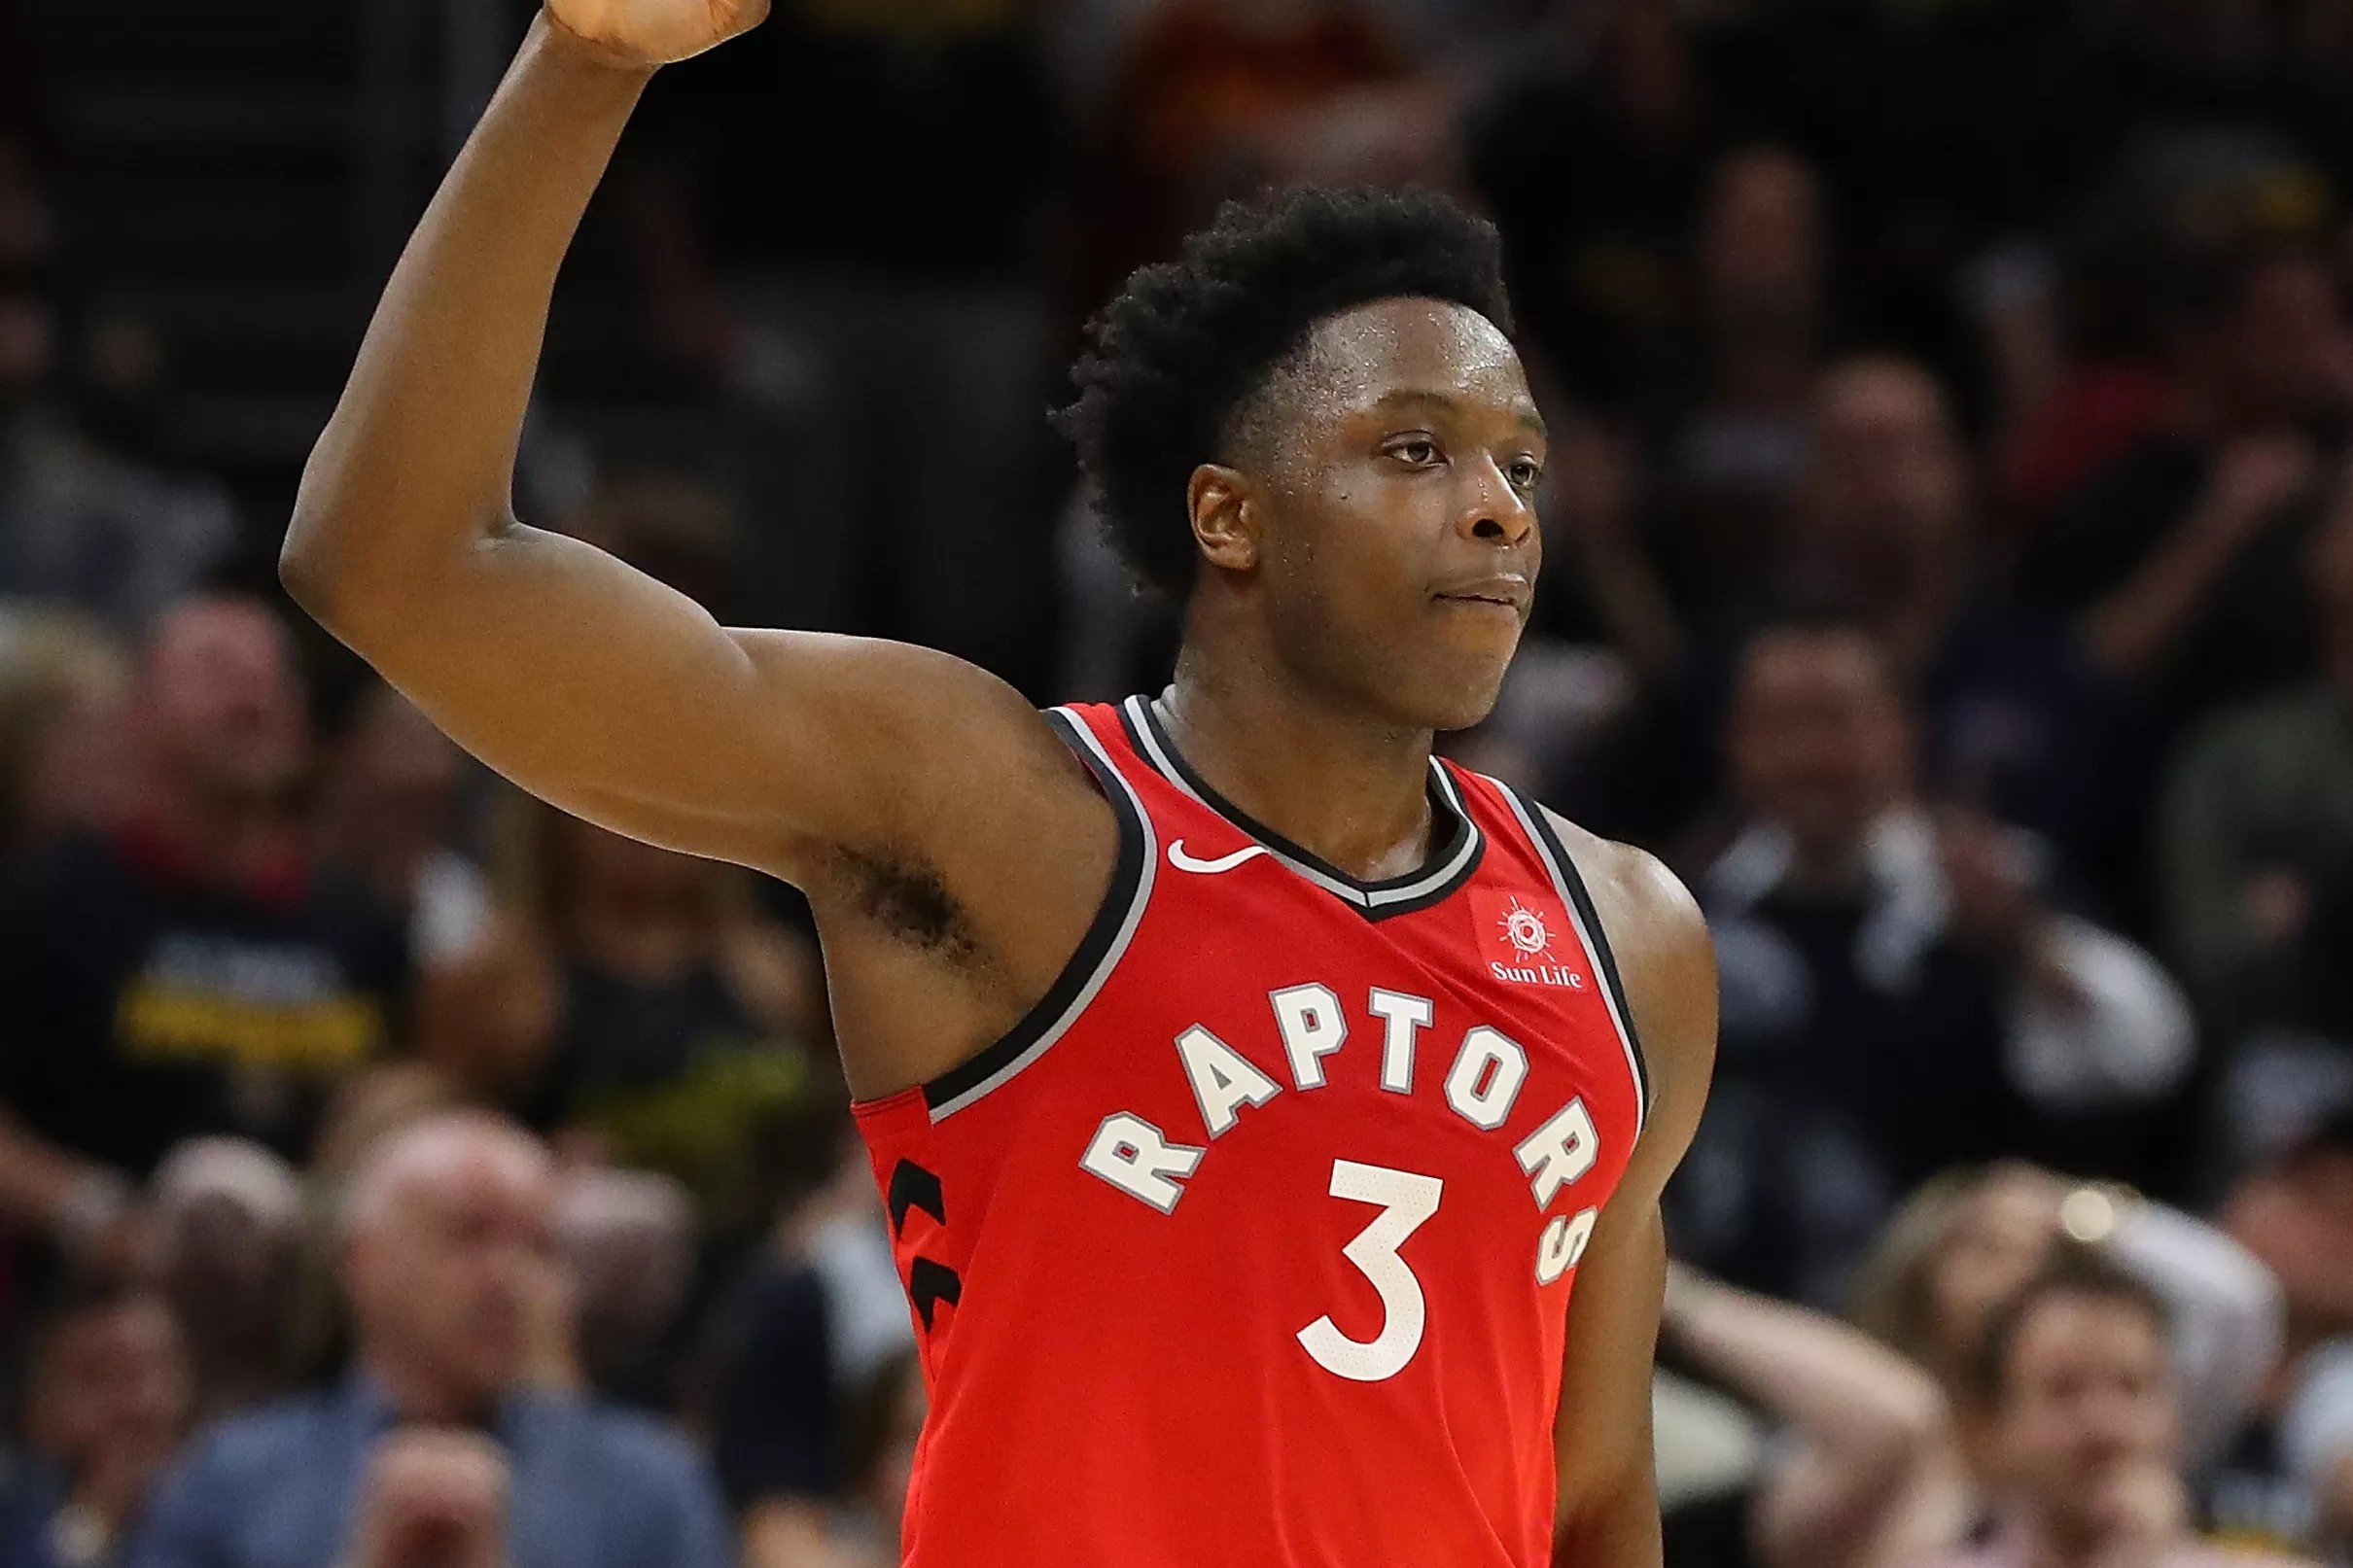 Report: OG Anunoby and four others confirmed for Las Vegas Summer League